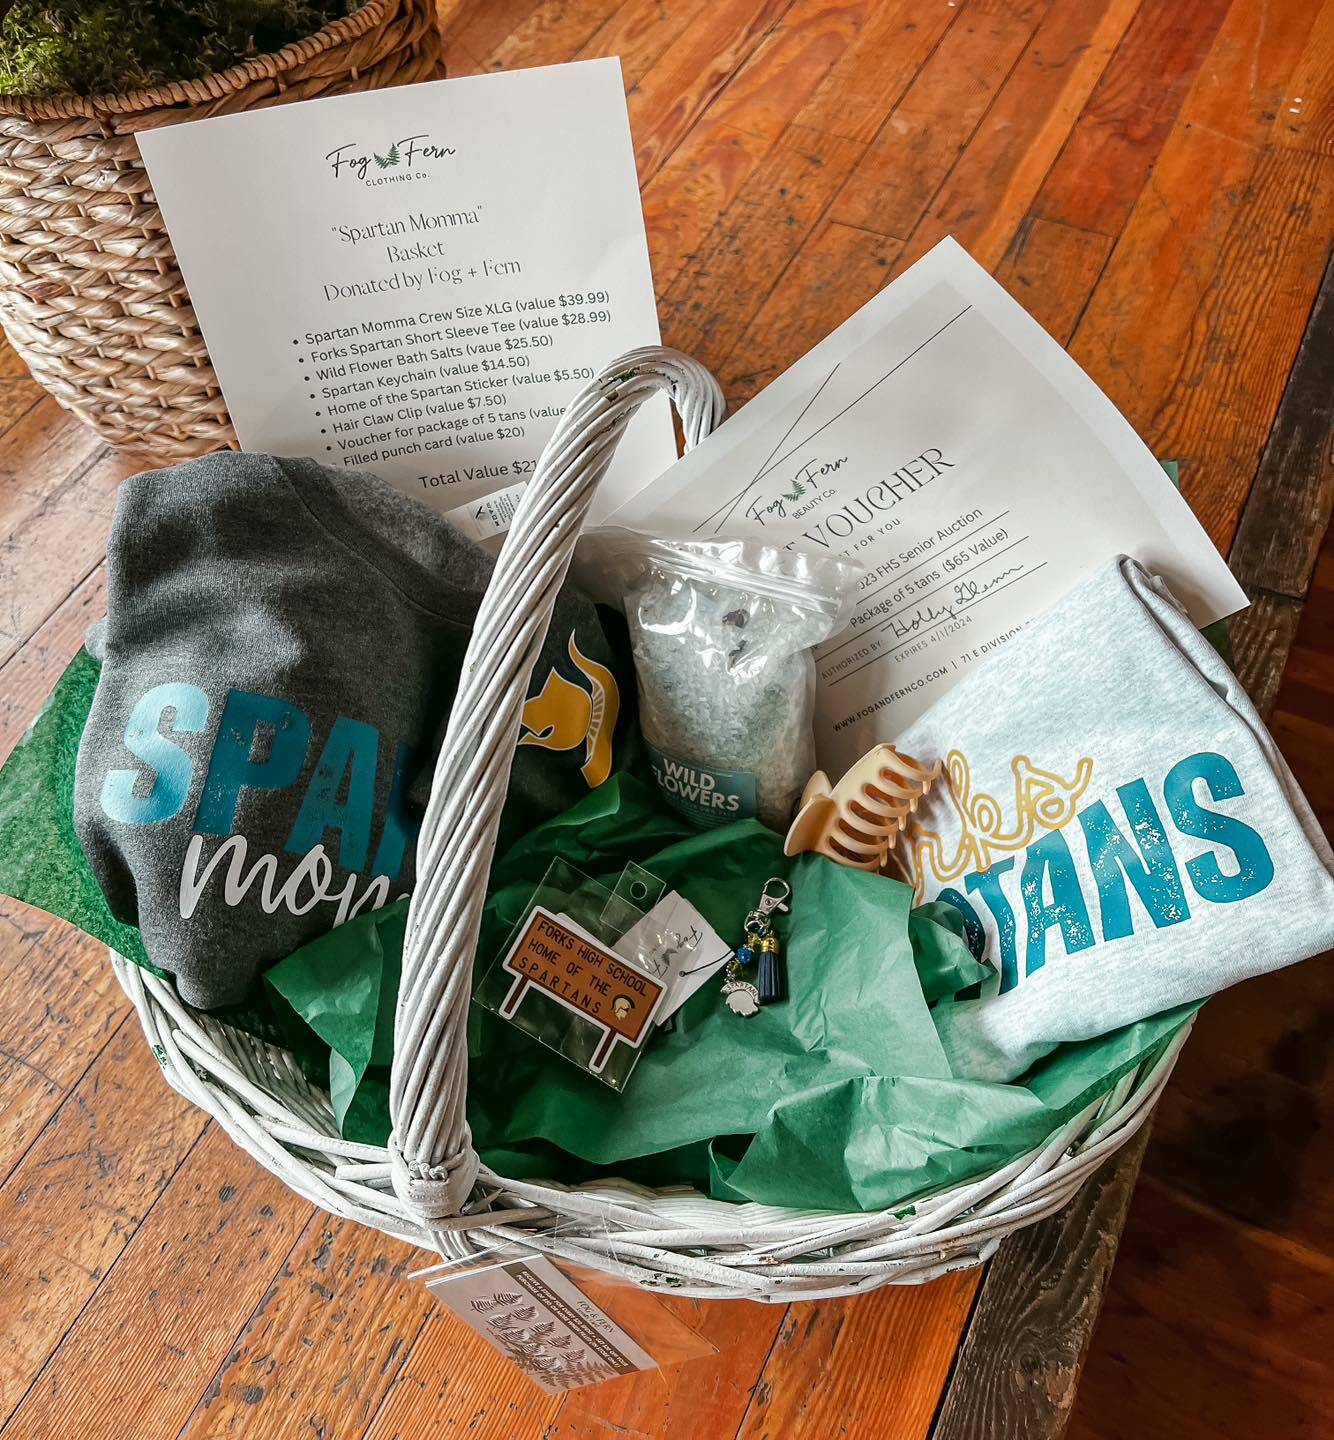 Many local businesses like Fog and Fern Clothing Co., who donated this basket, have generously donated amazing items for this weekend’s fundraiser benefiting Forks graduates.